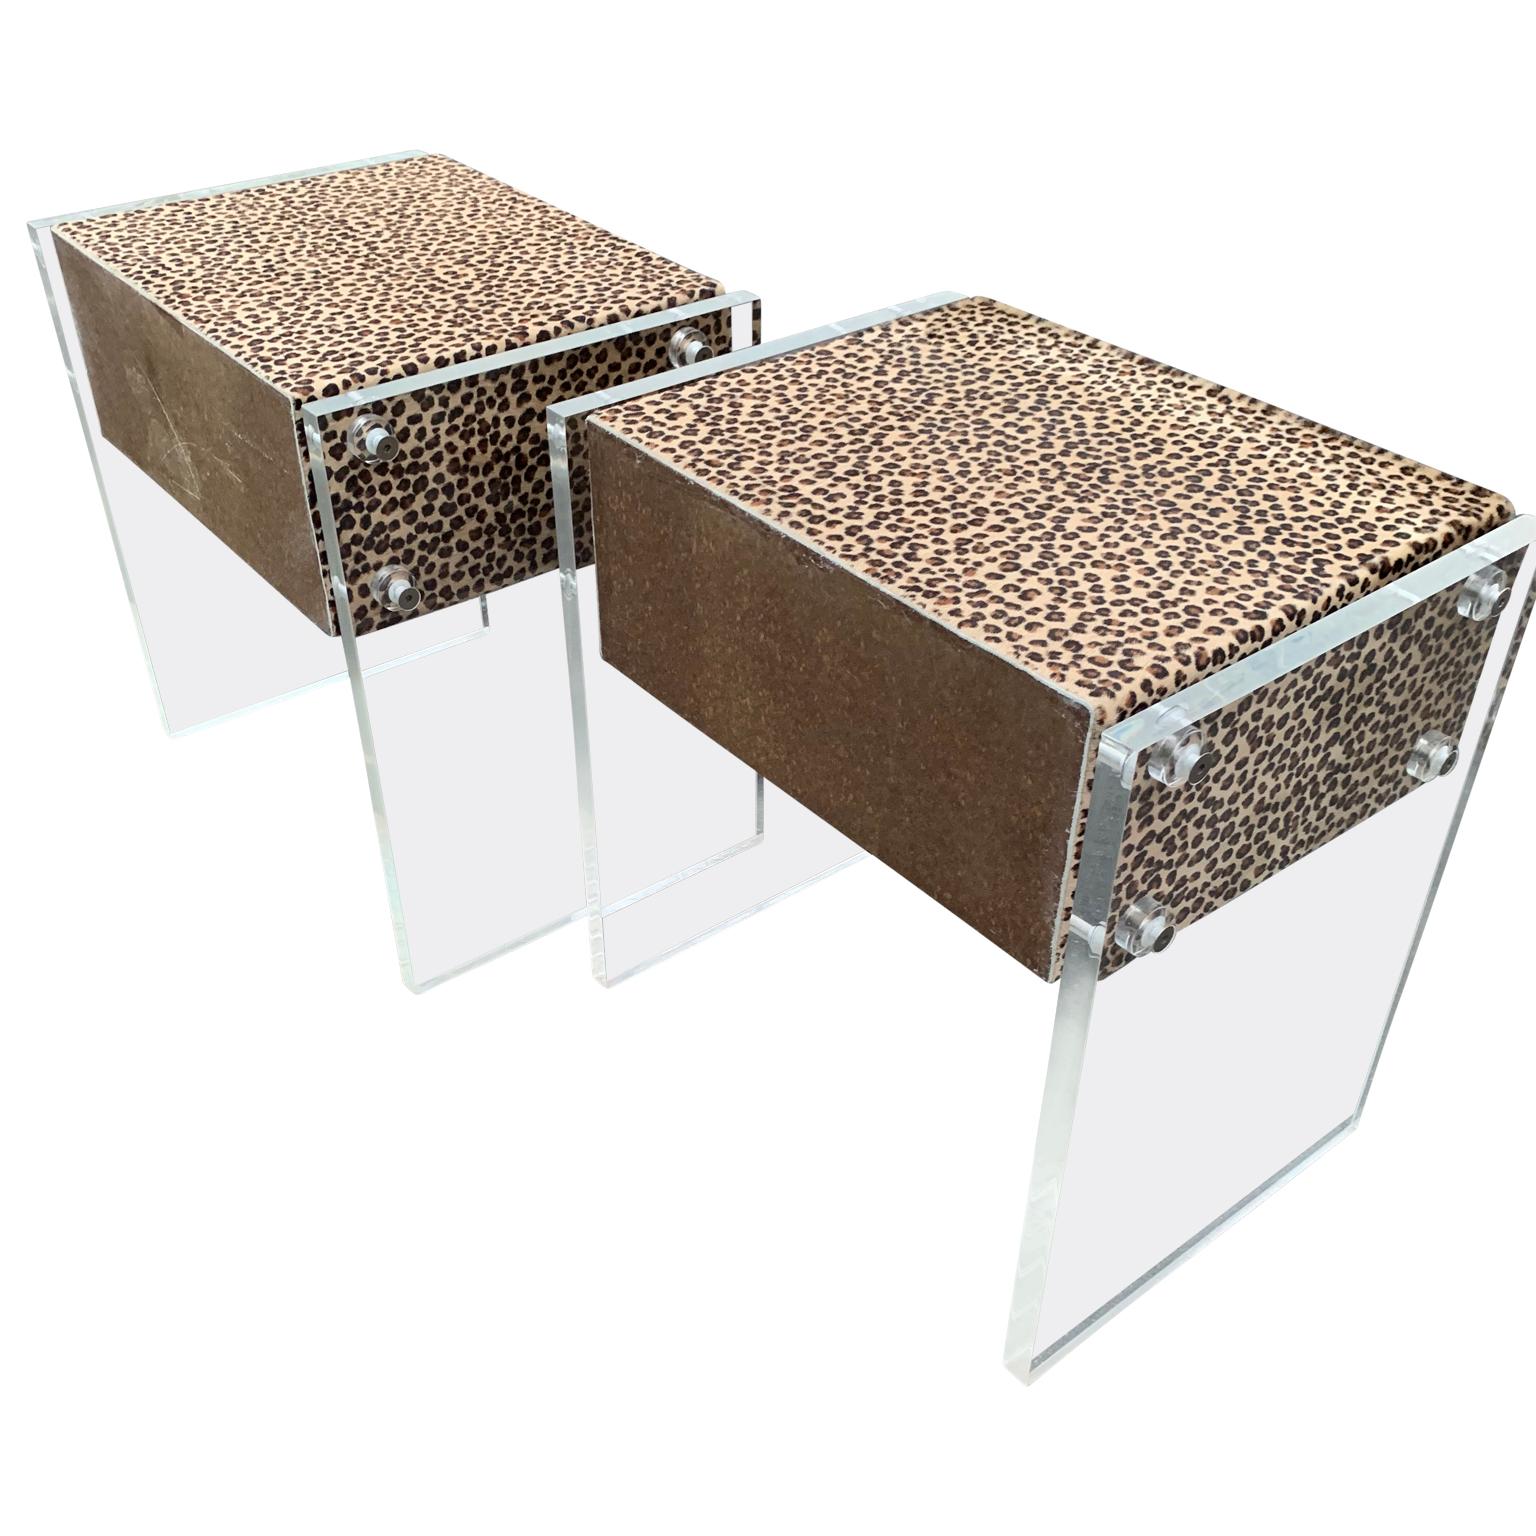 20th Century Pair of Faux Cheetah Skin Upholstered Nightstands with Lucite Side Panels